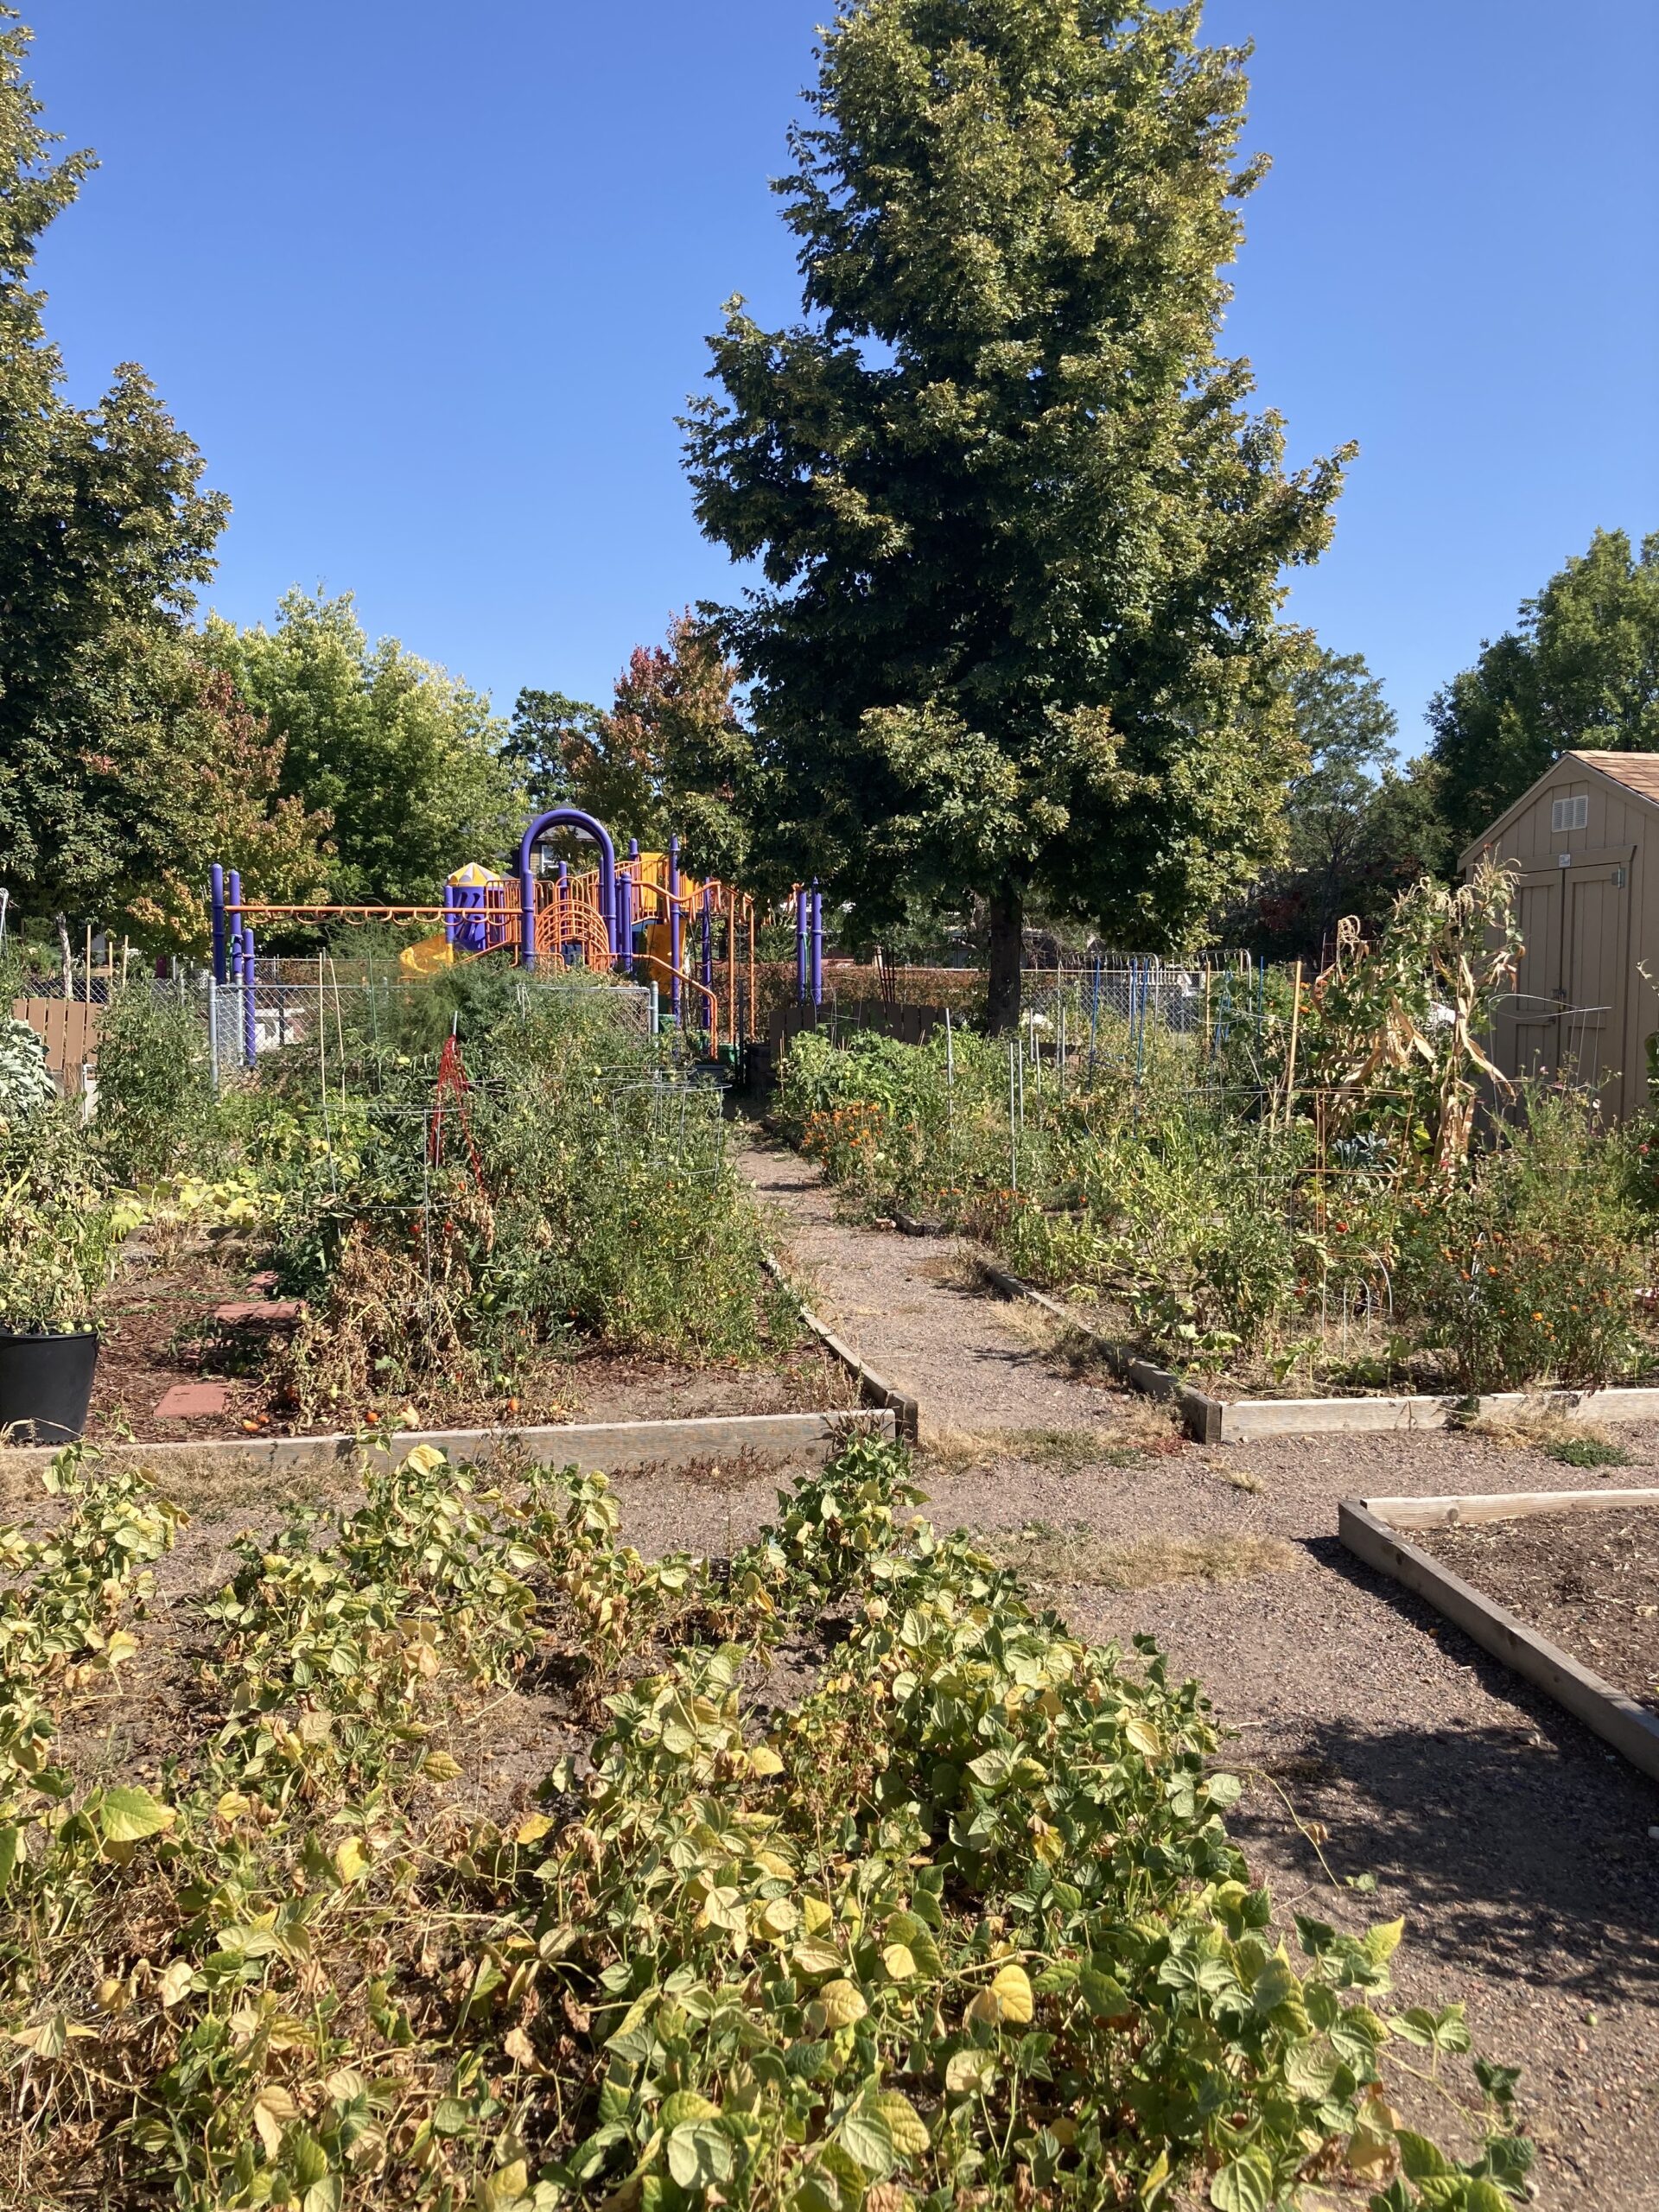 Our Next Community Garden is Coming to Union Station Neighborhood!